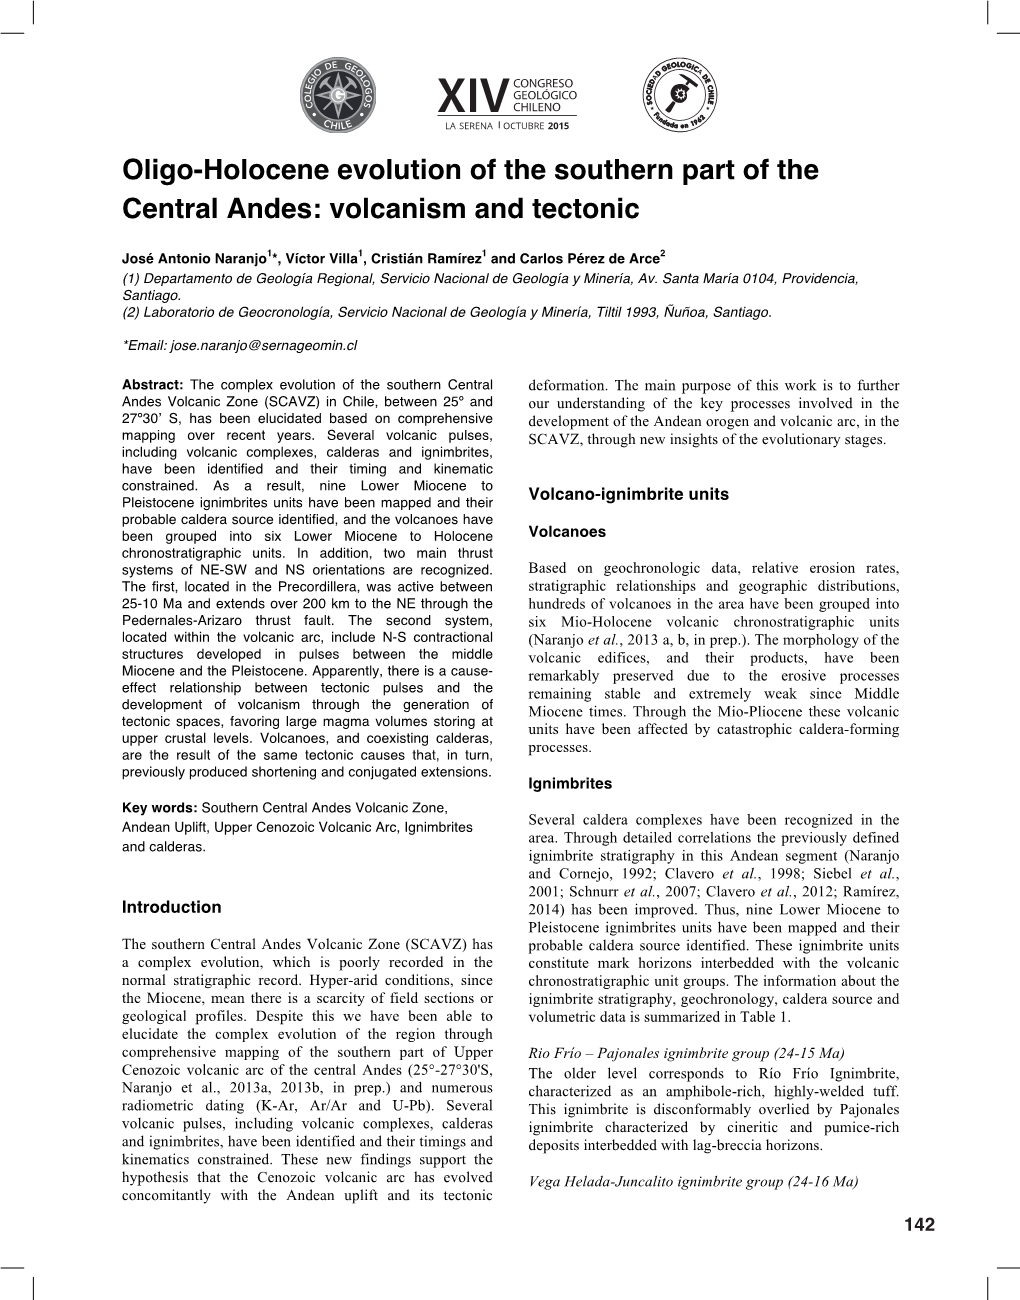 Oligo-Holocene Evolution of the Southern Part of the Central Andes: Volcanism and Tectonic